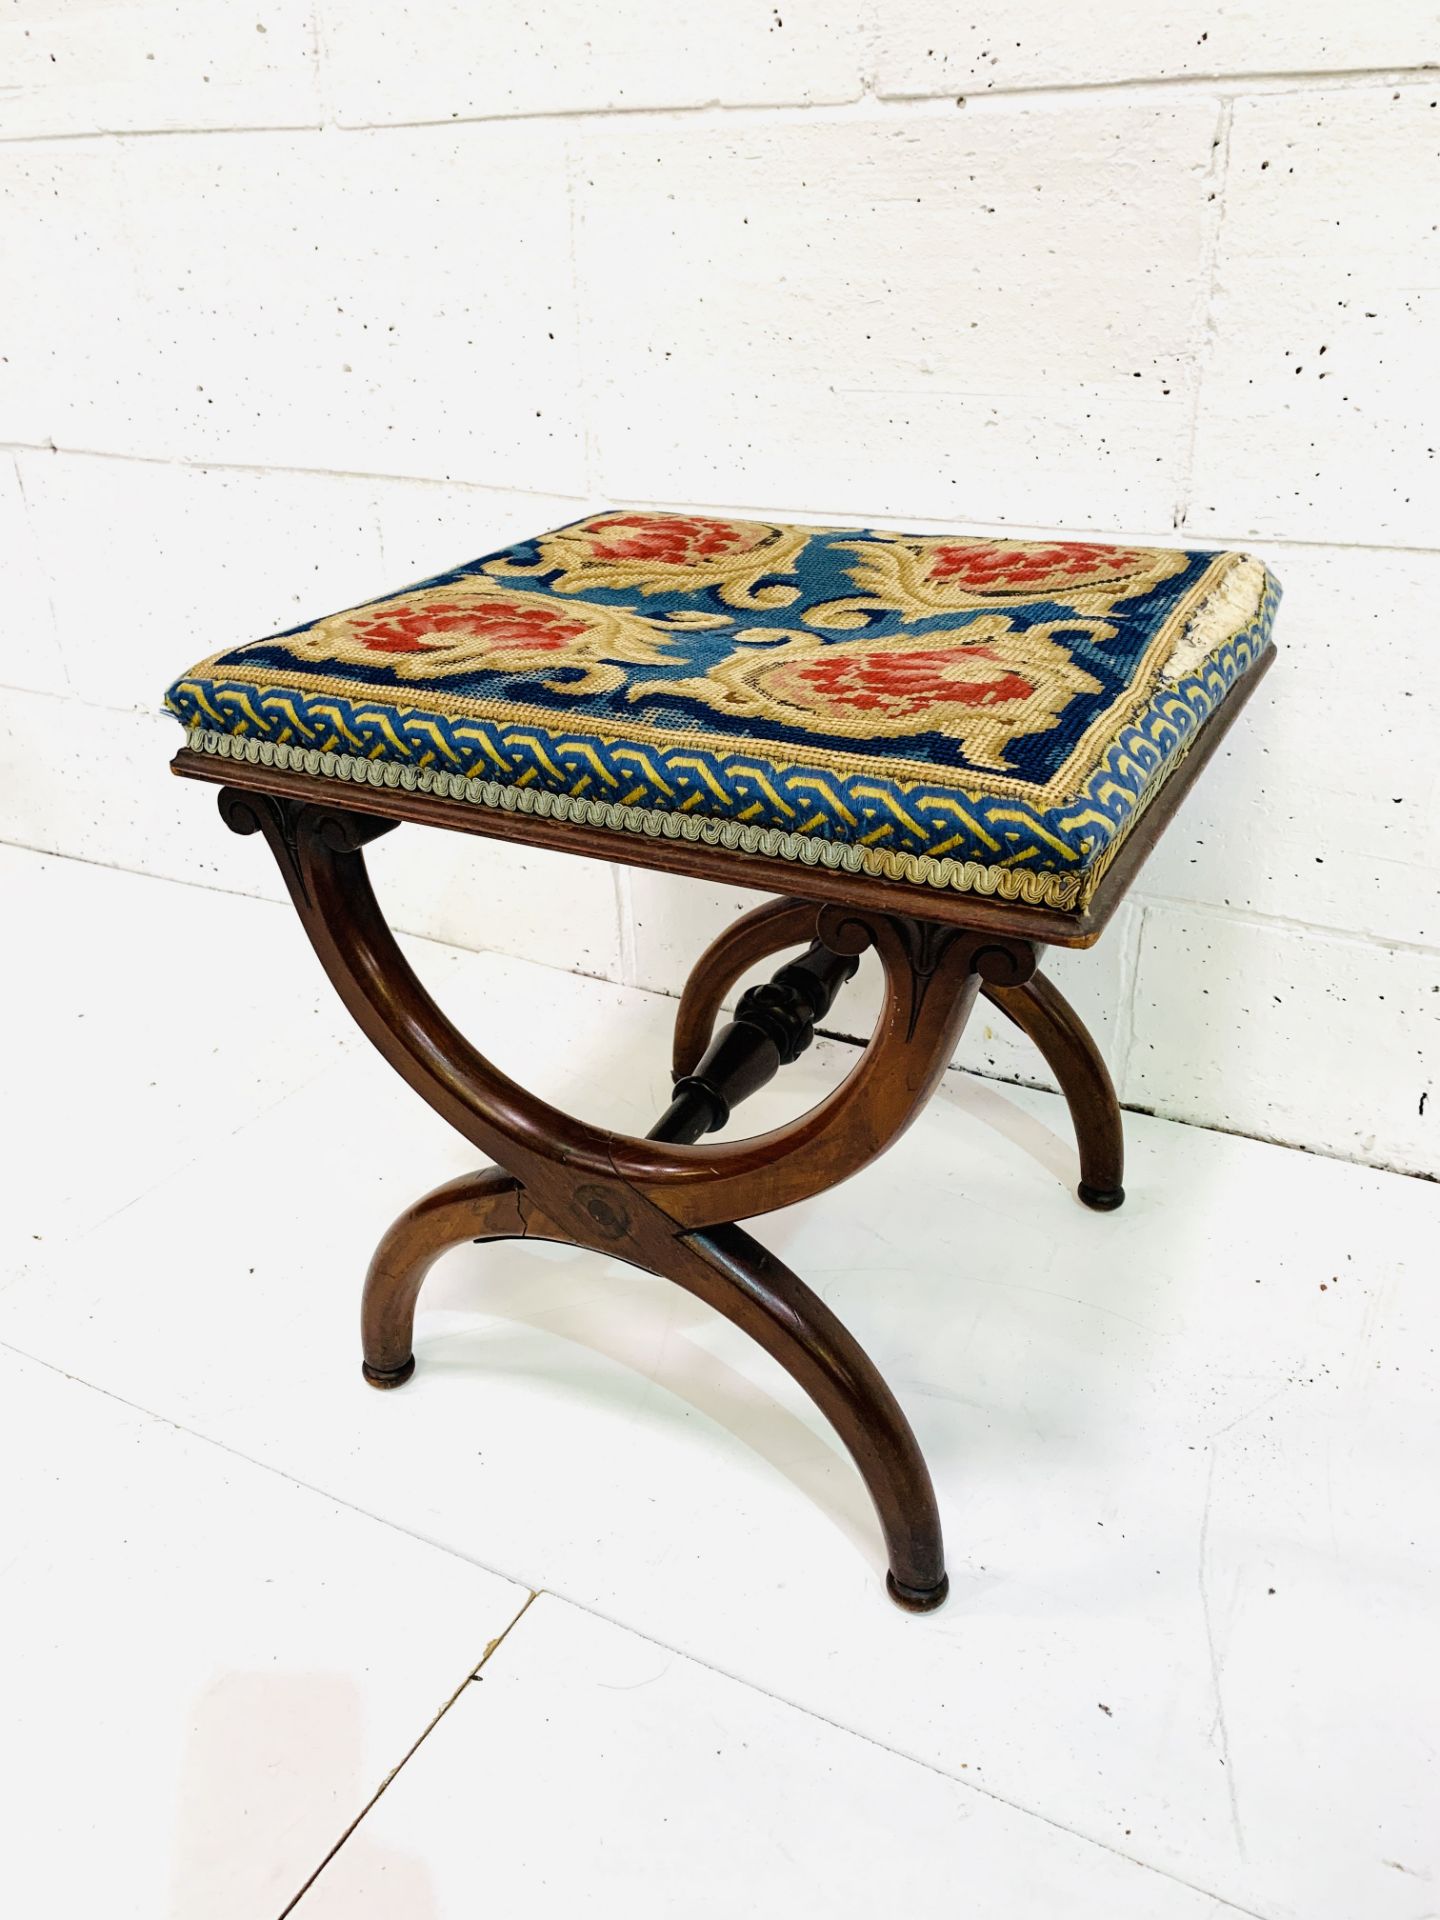 Mahogany X frame stool with tapestry seat - Image 3 of 3